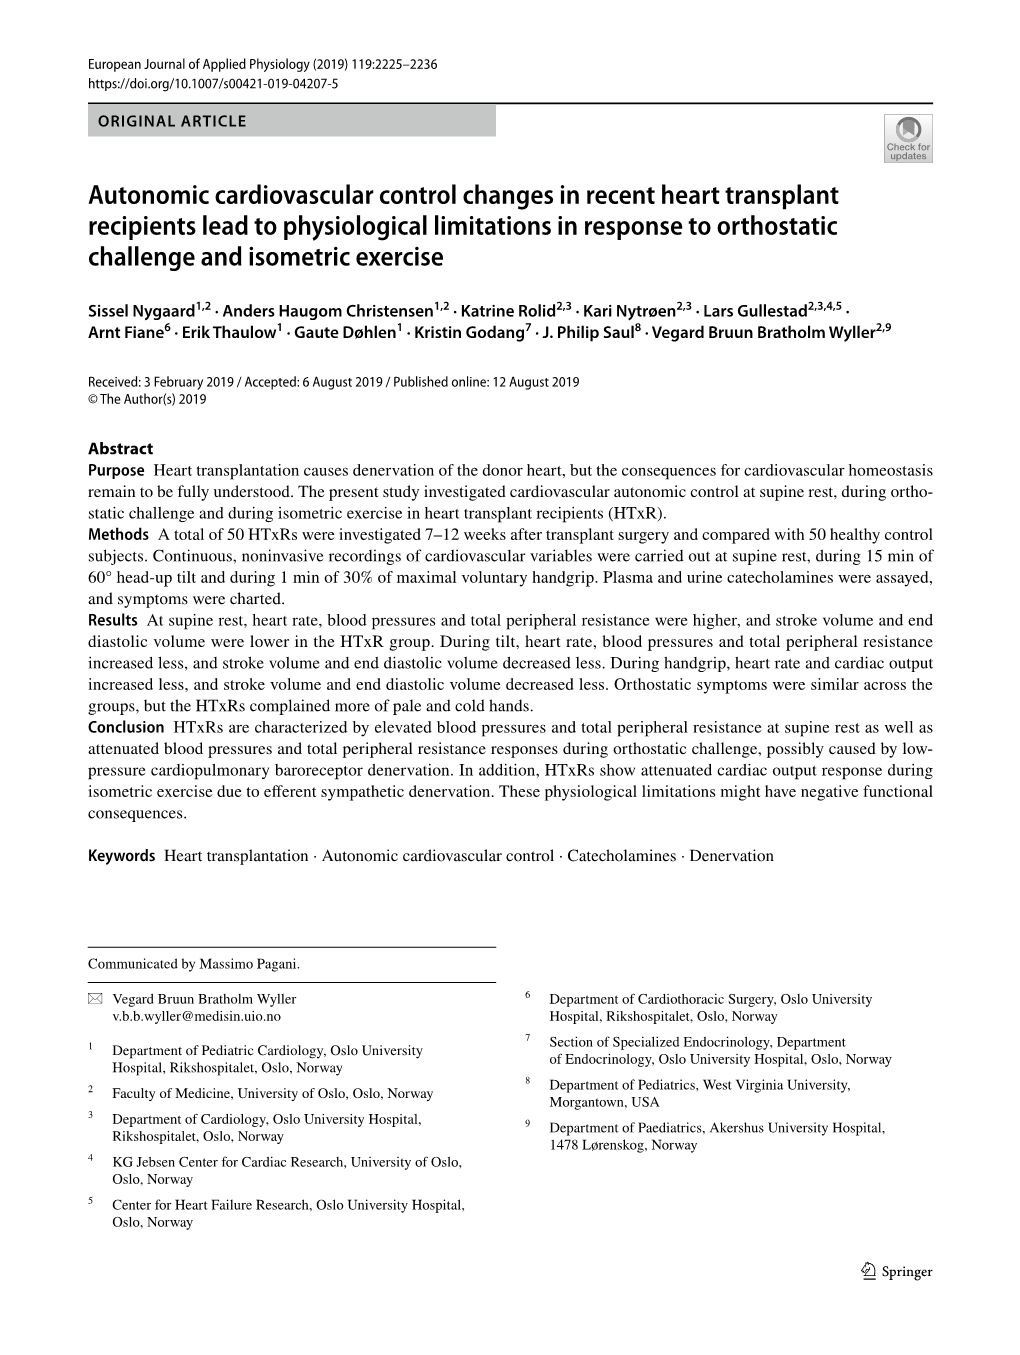 Autonomic Cardiovascular Control Changes in Recent Heart Transplant